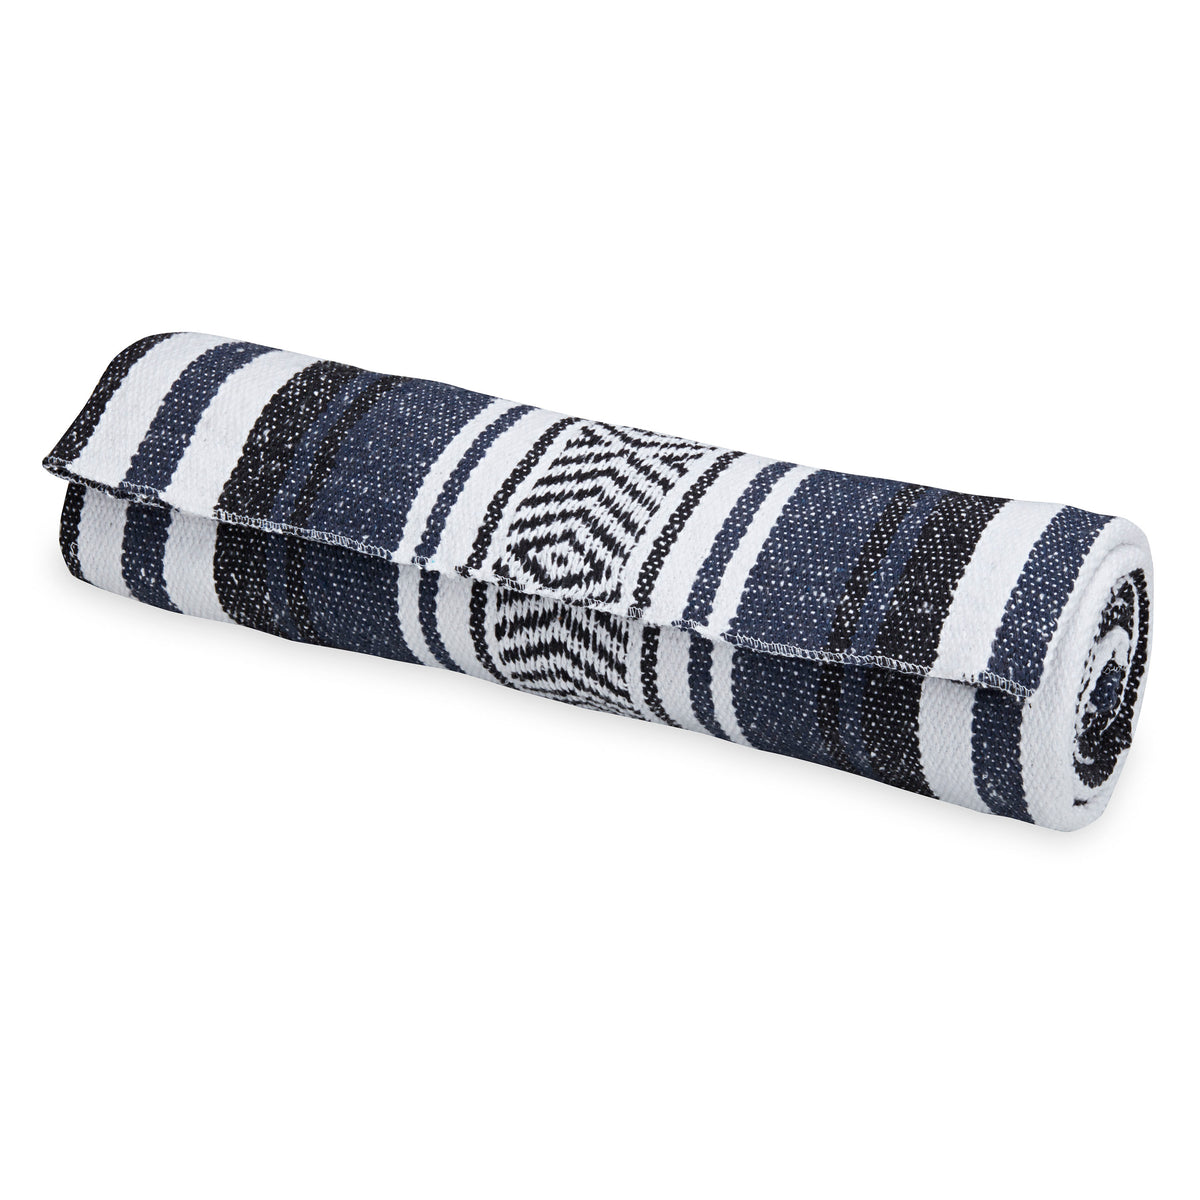 Traditional Mexican Woven Blanket - Gaiam Yoga Blanket